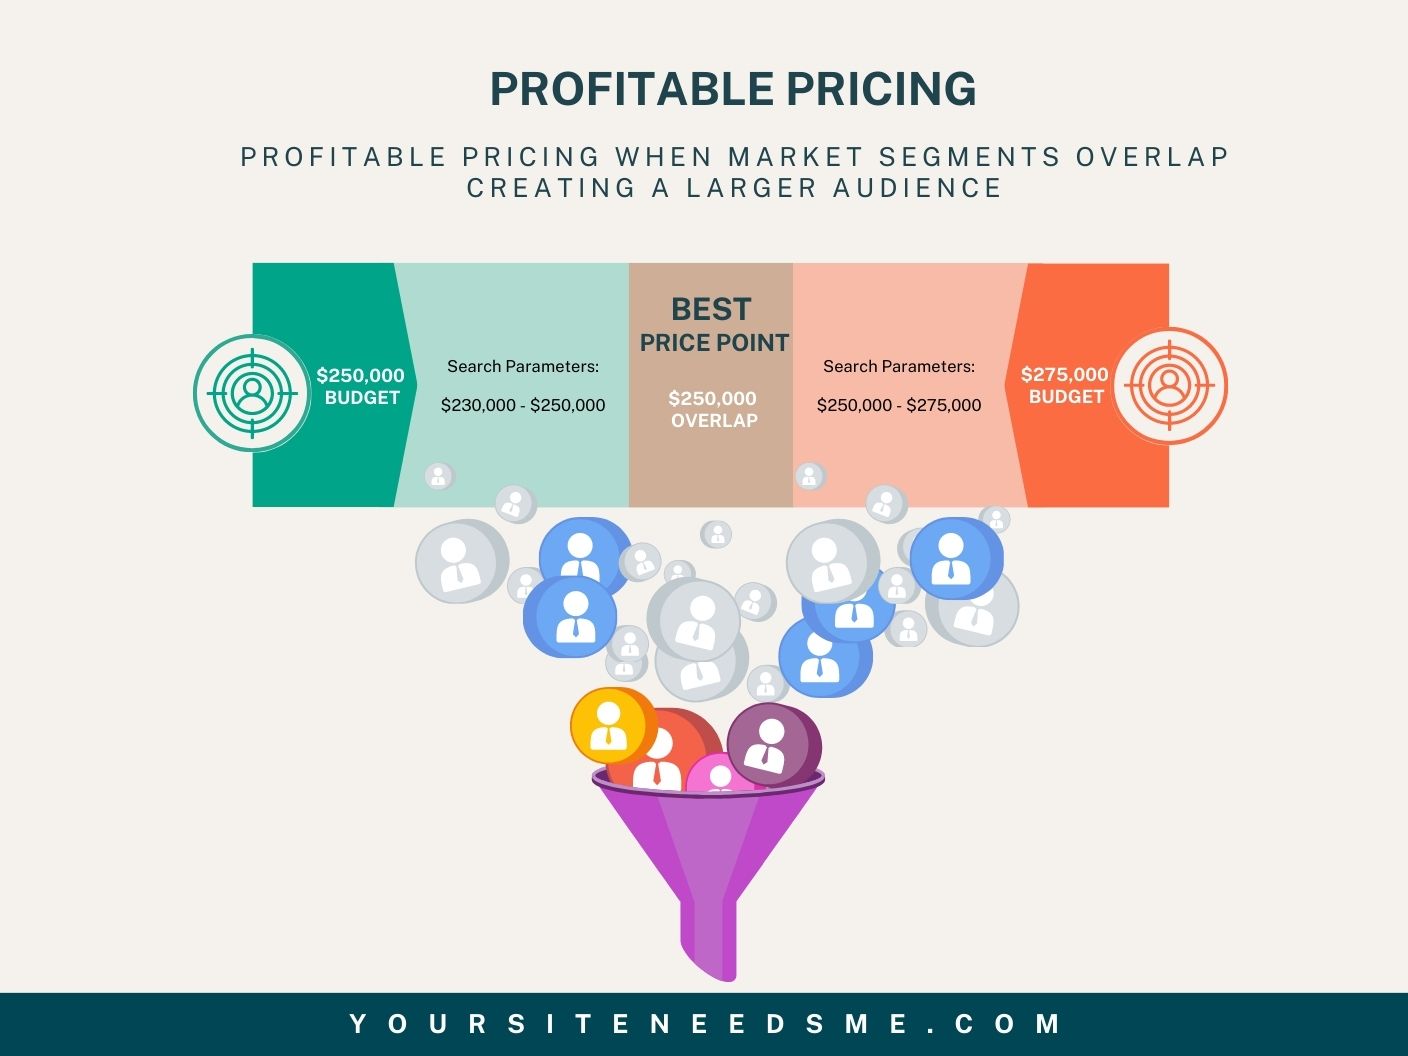 Profitable Pricing - Profitable Pricing When Market Segments Overlap creating a larger audience